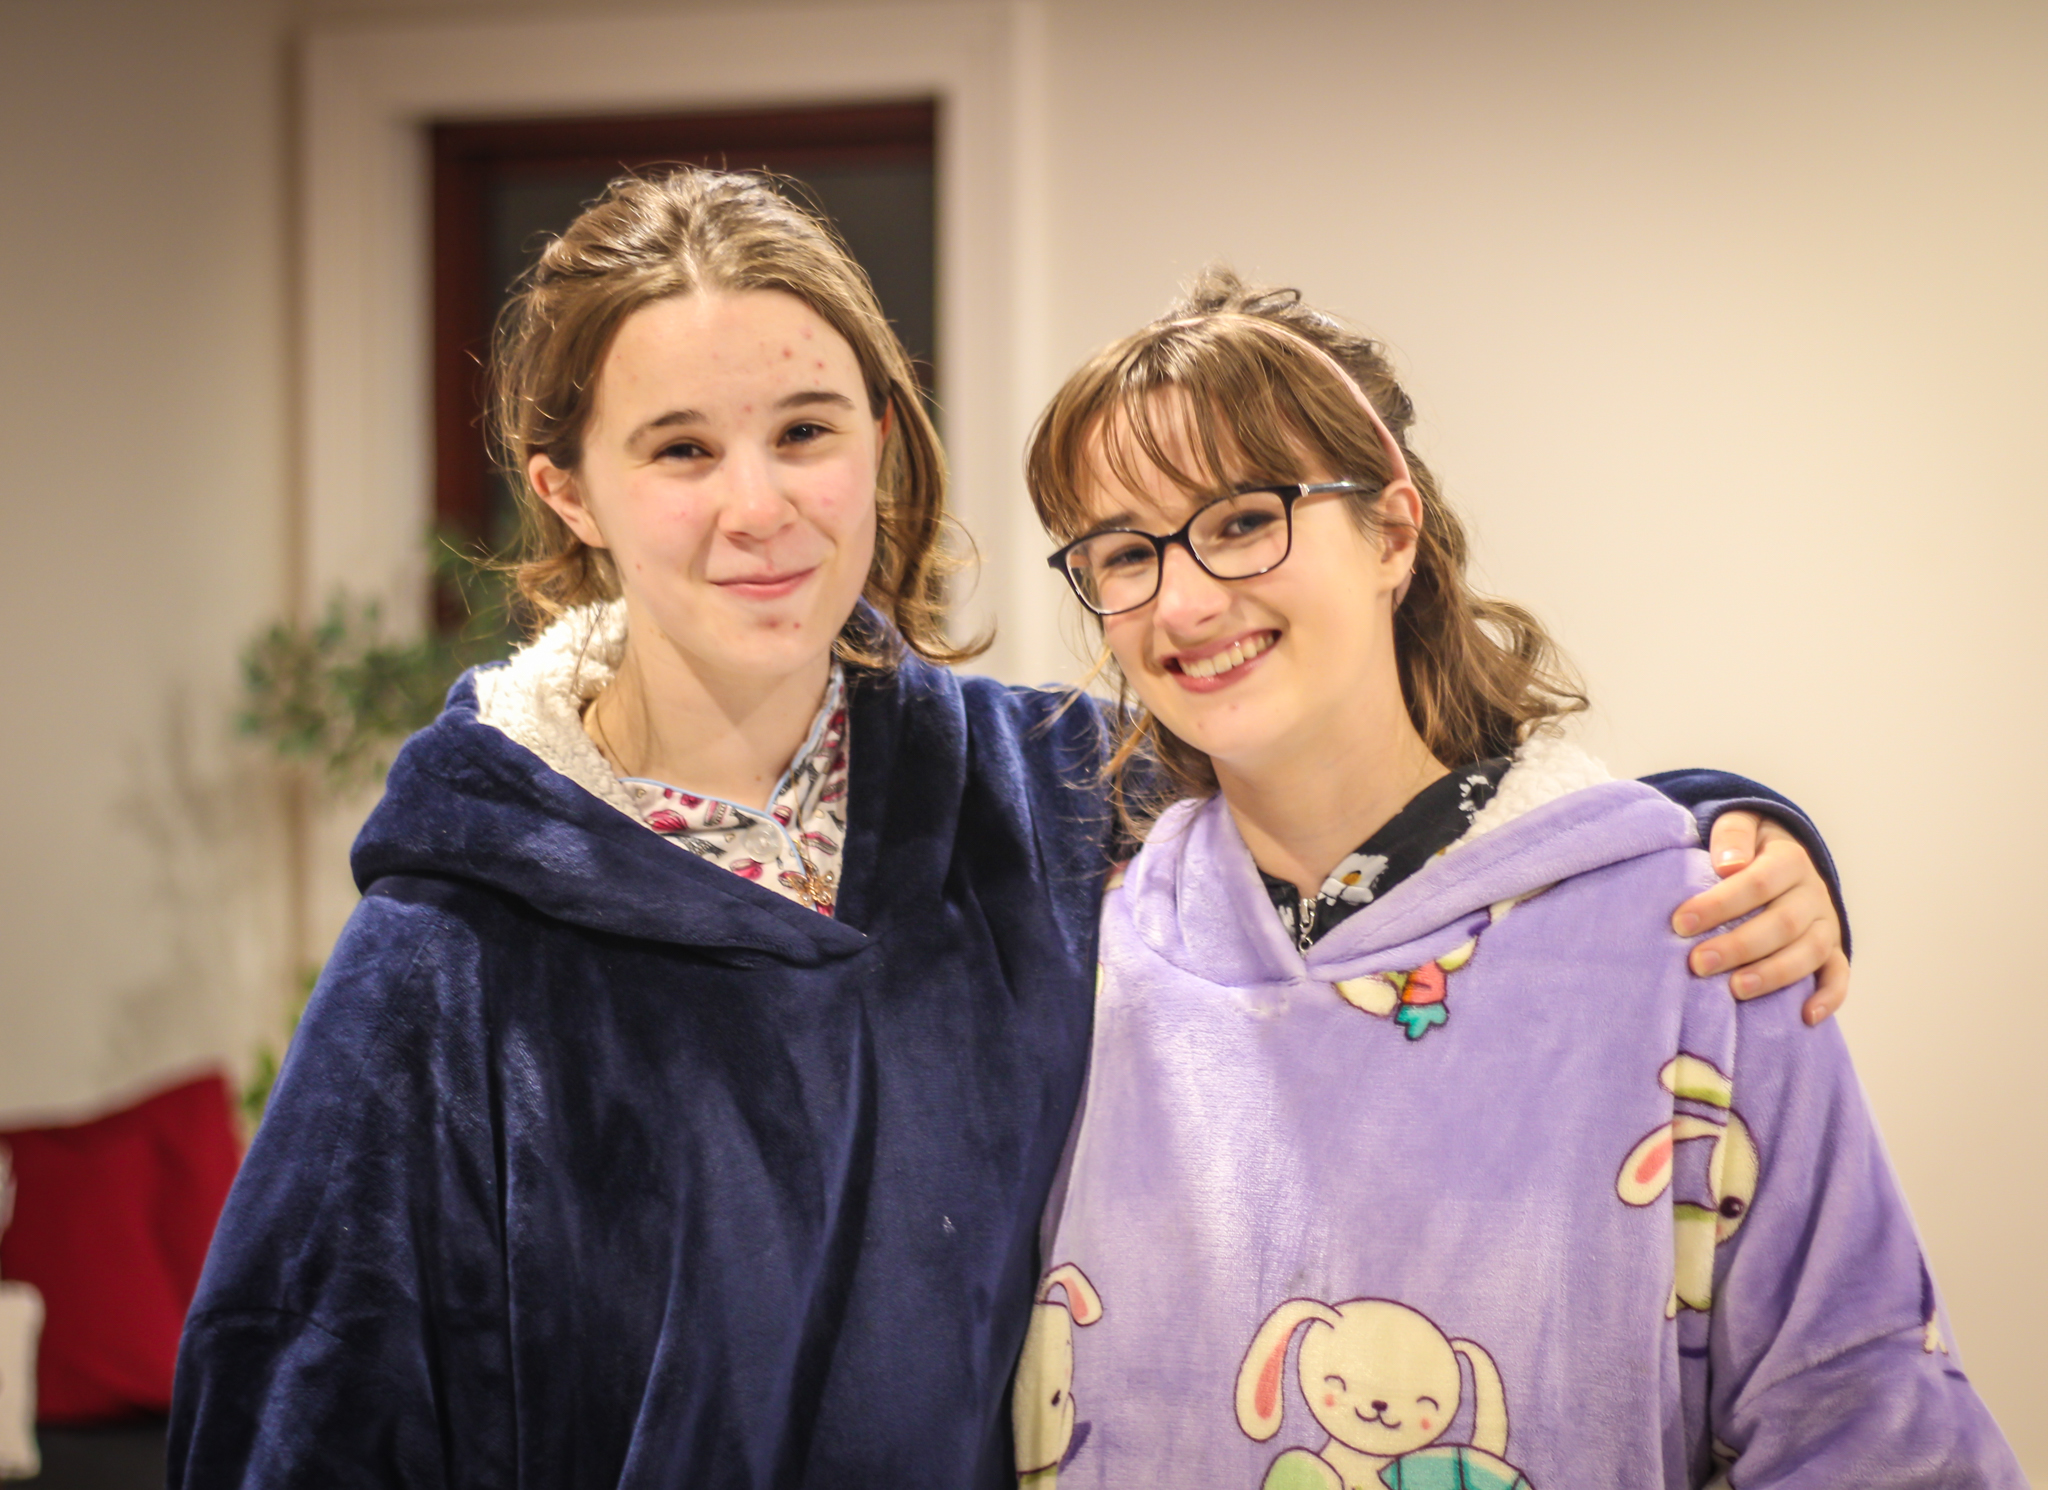 Students get a taste of Campion experience in first Winter Sleepover